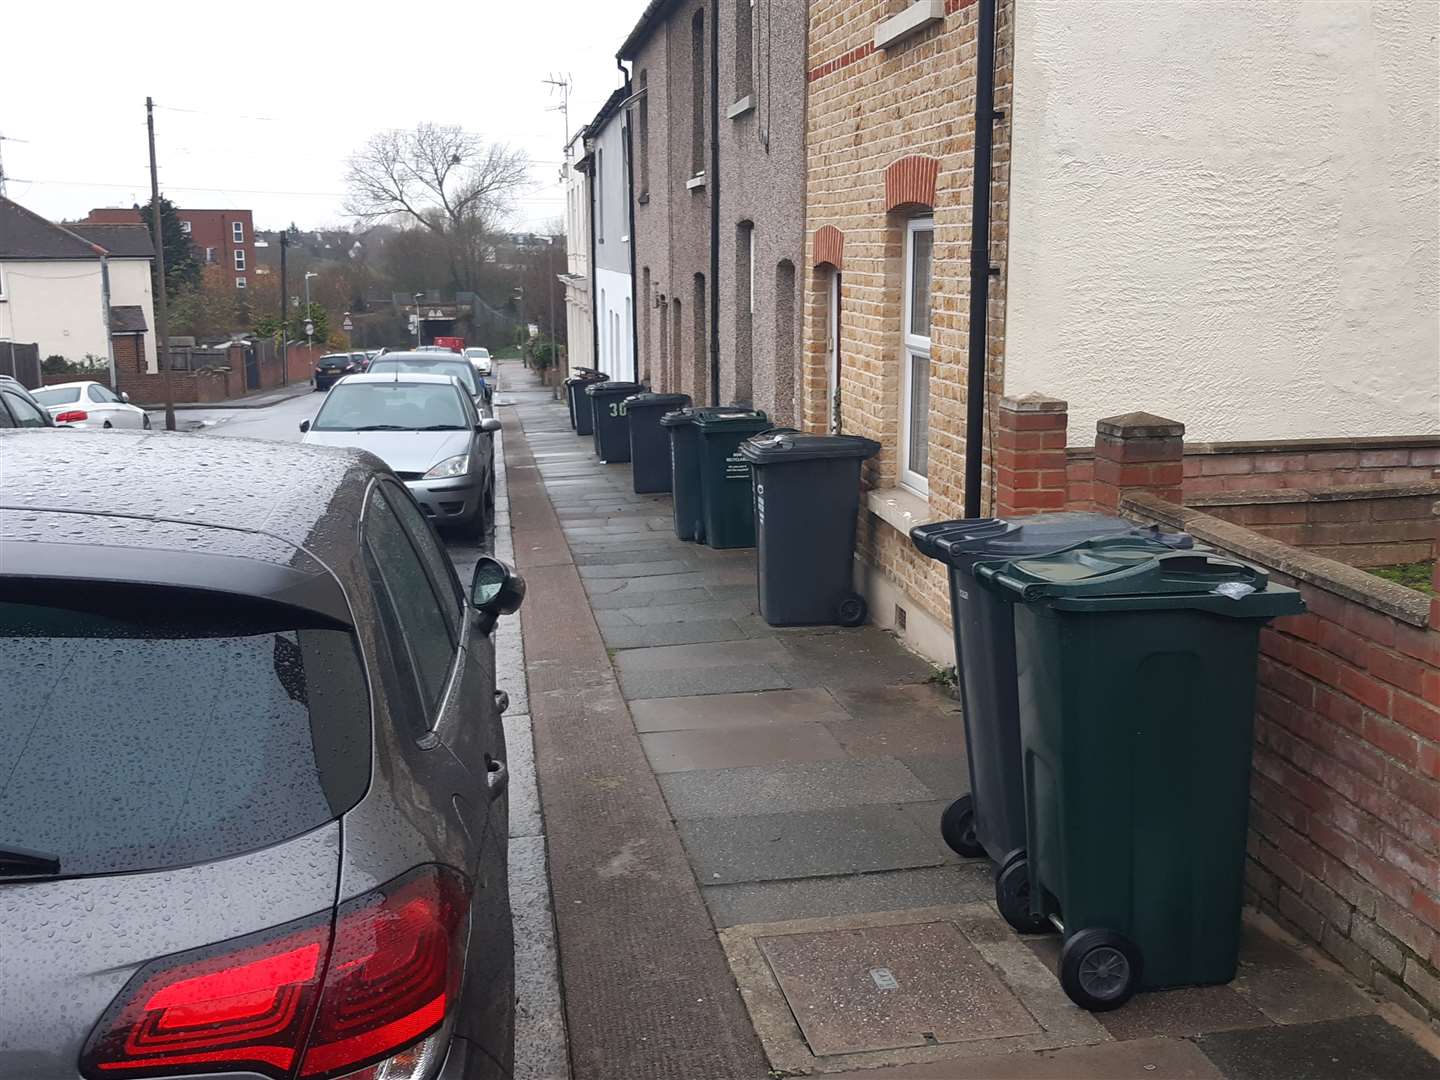 Bin collection services in Dartford are being placed under increased pressure by external factors.